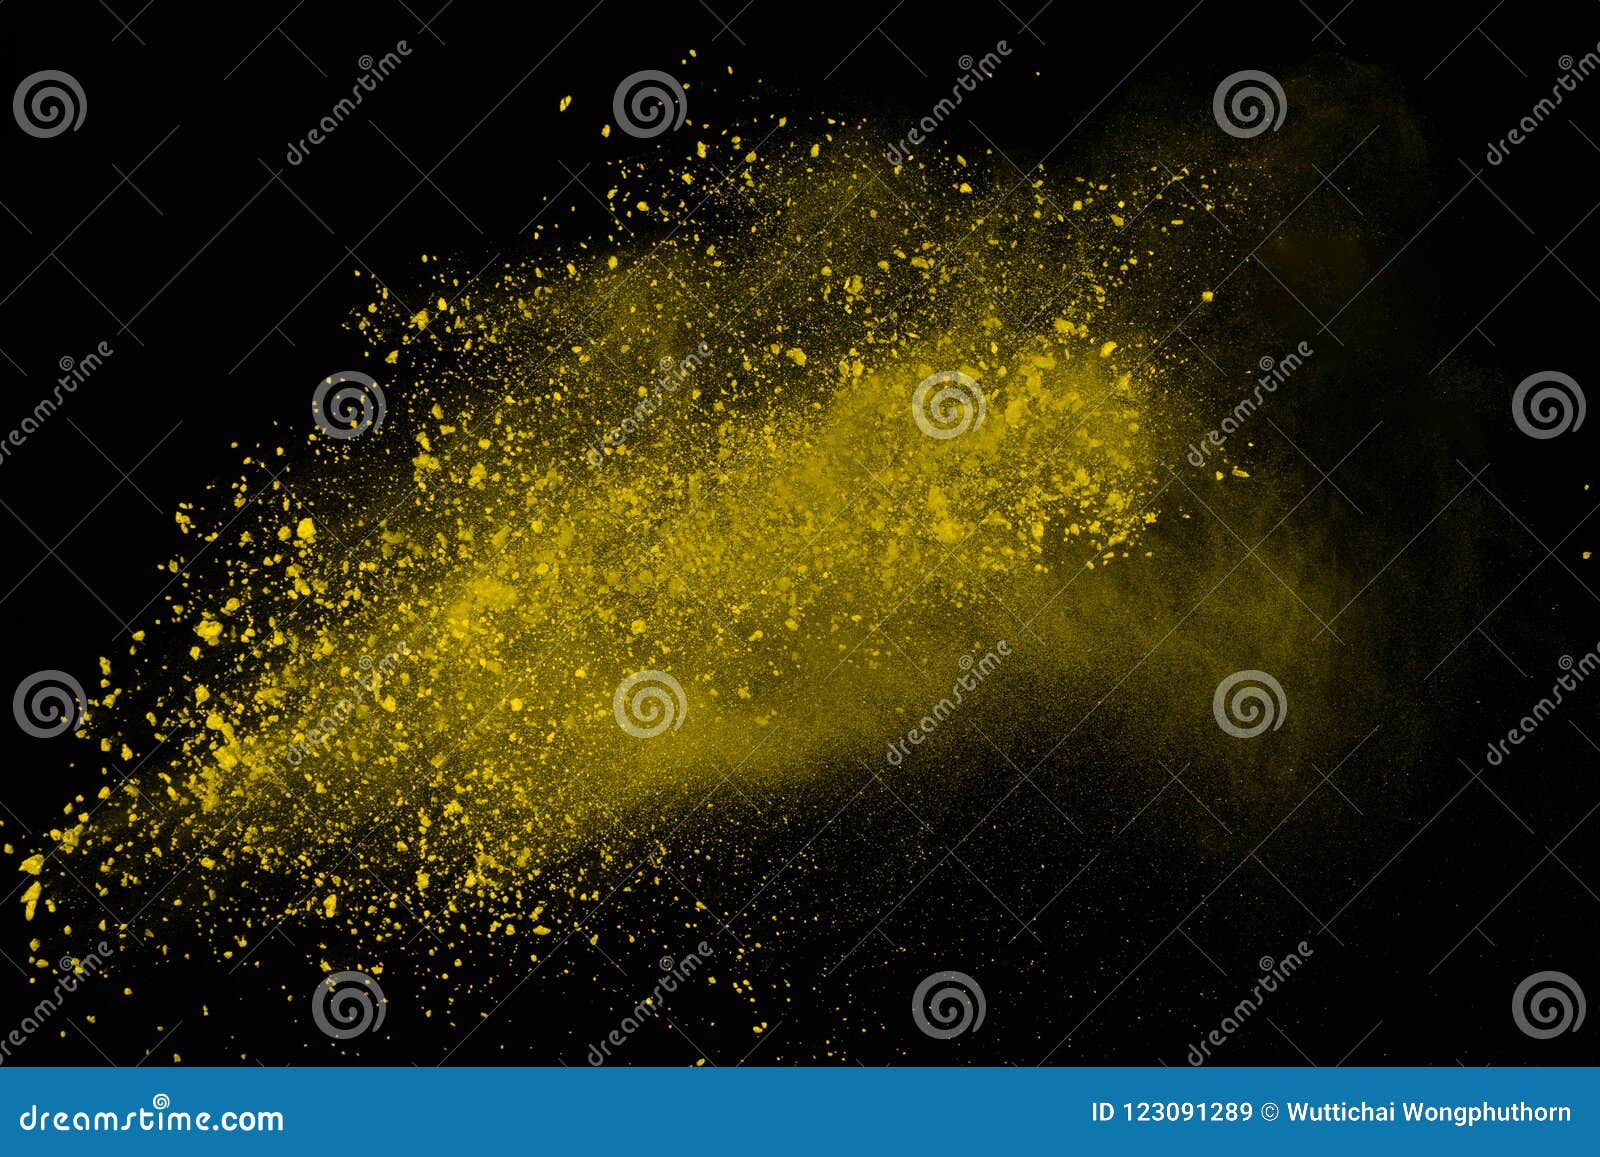 explosion of colored powder  on white background. power or clouds splatted. freez motion of yellow dust exploding.